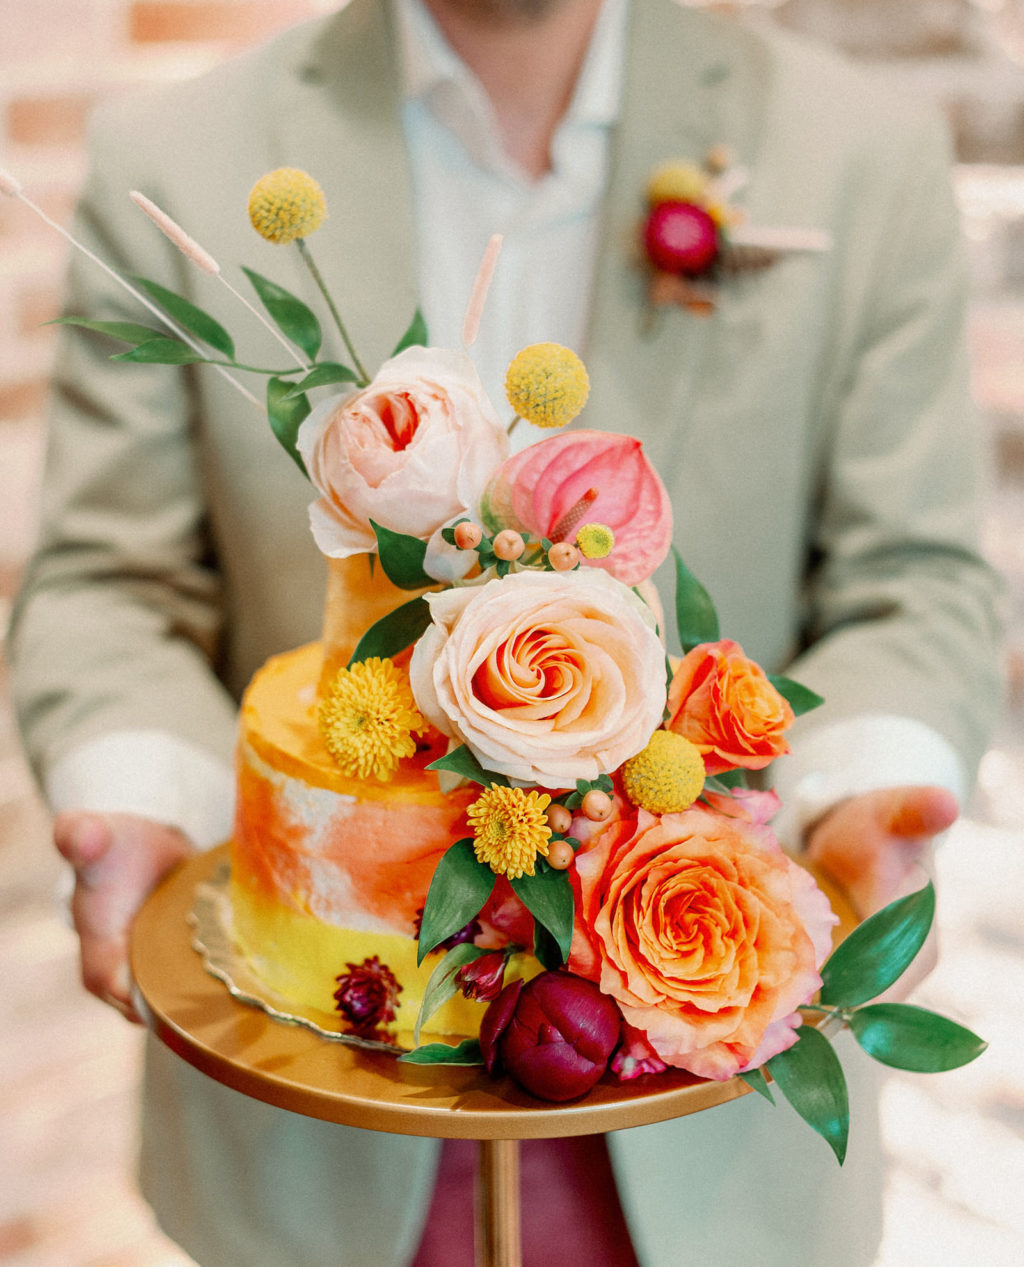 Whimsical and Colorful Yellow and Orange Small Two Tier Wedding Cake with Real Blush Pink and Orange Roses, Yellow Billy Ball Flowers | Tampa Bay Wedding Photographer Dewitt for Love